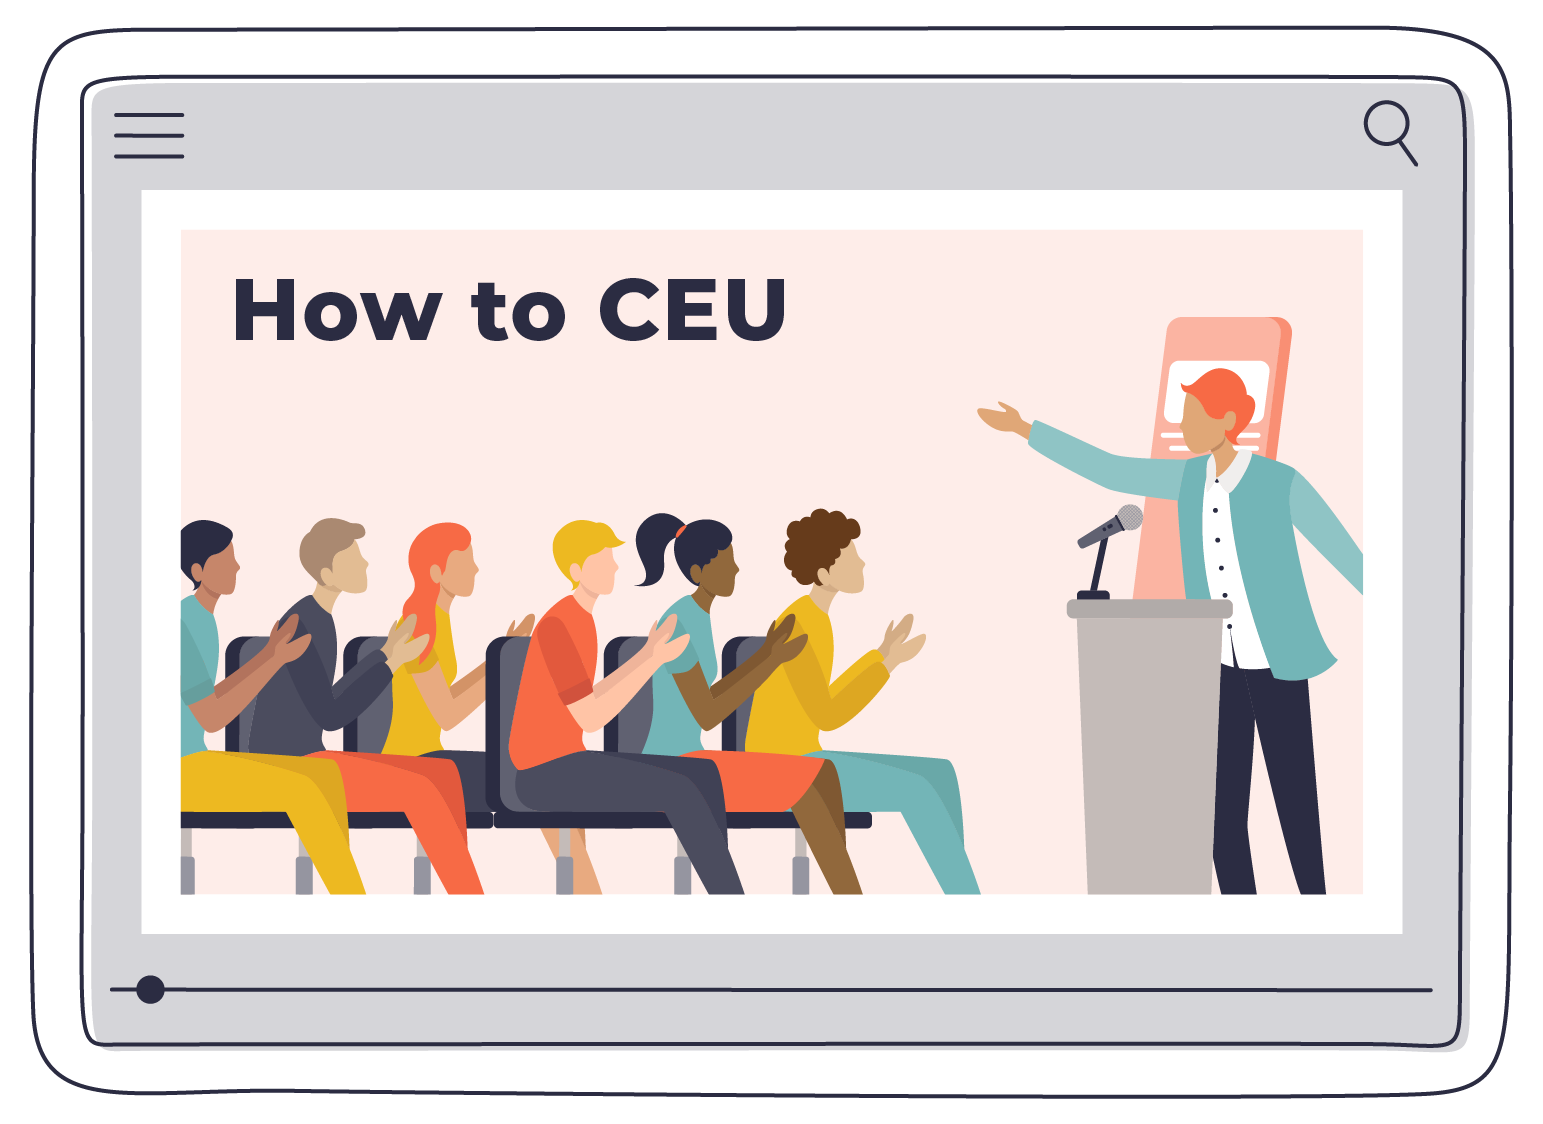 How to CEU free complementary course